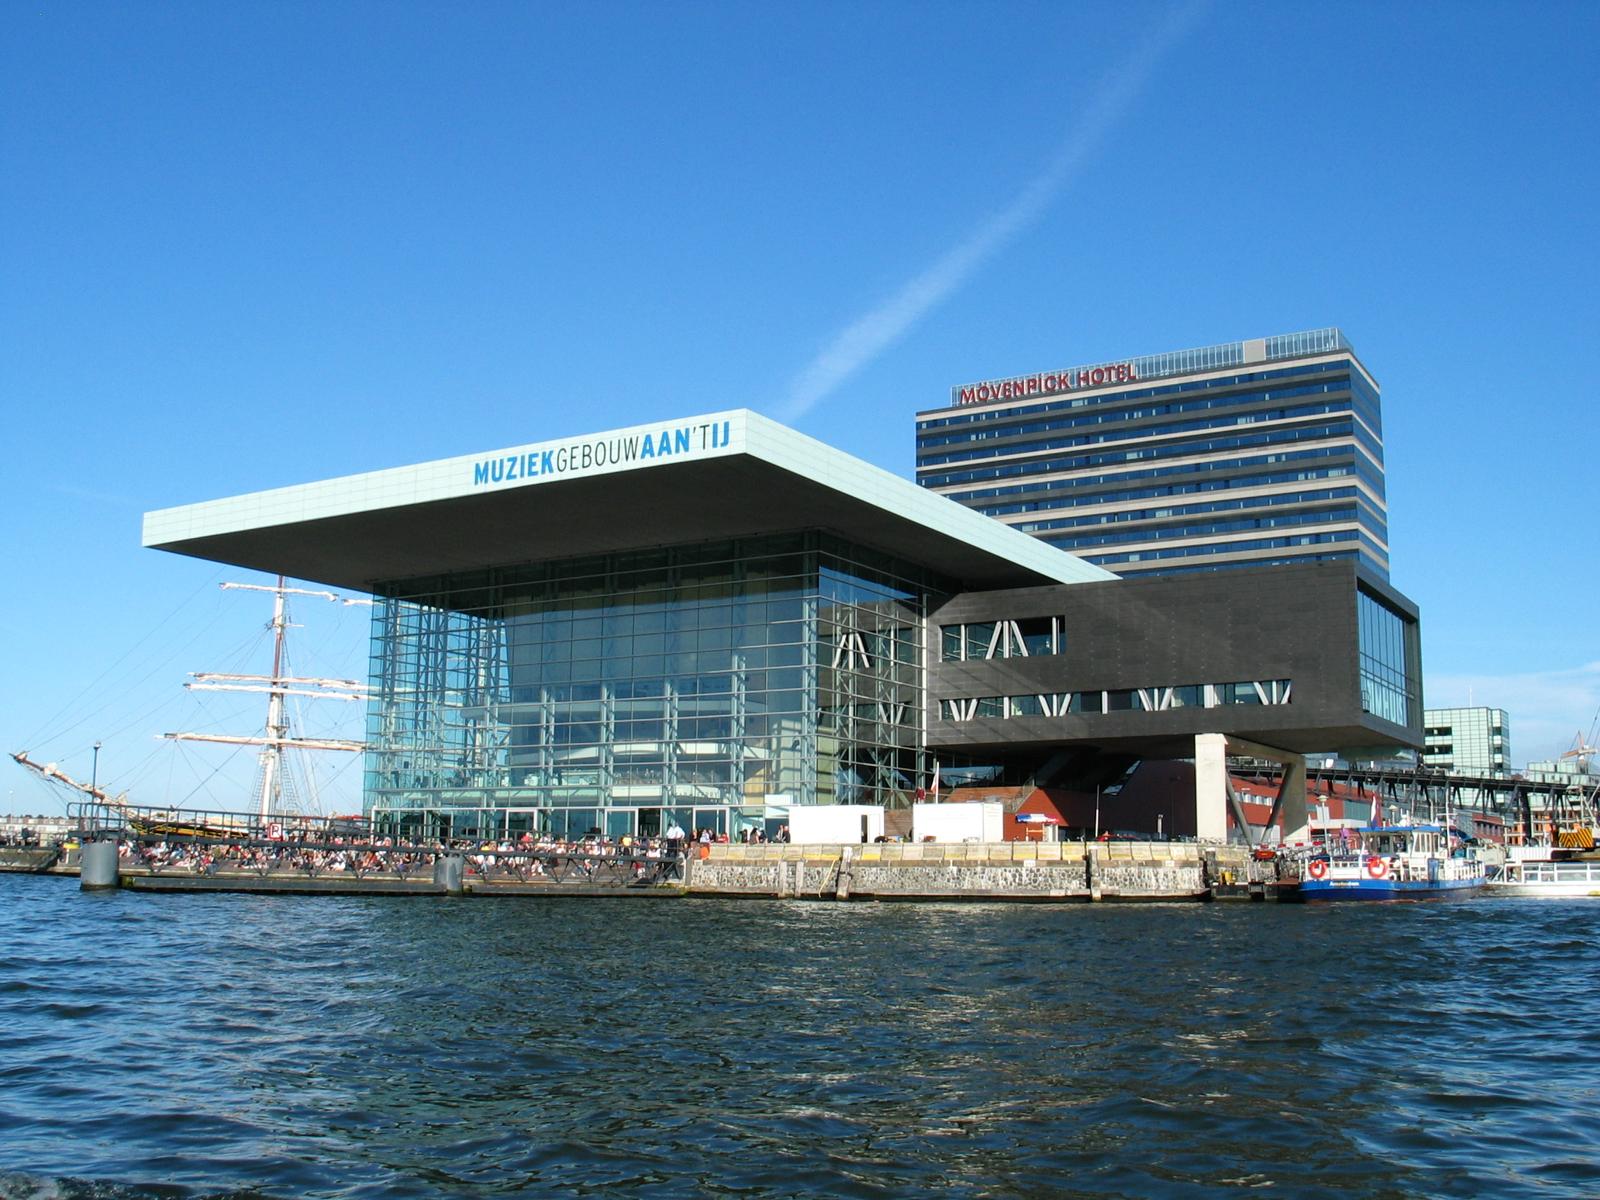 A museum on the water